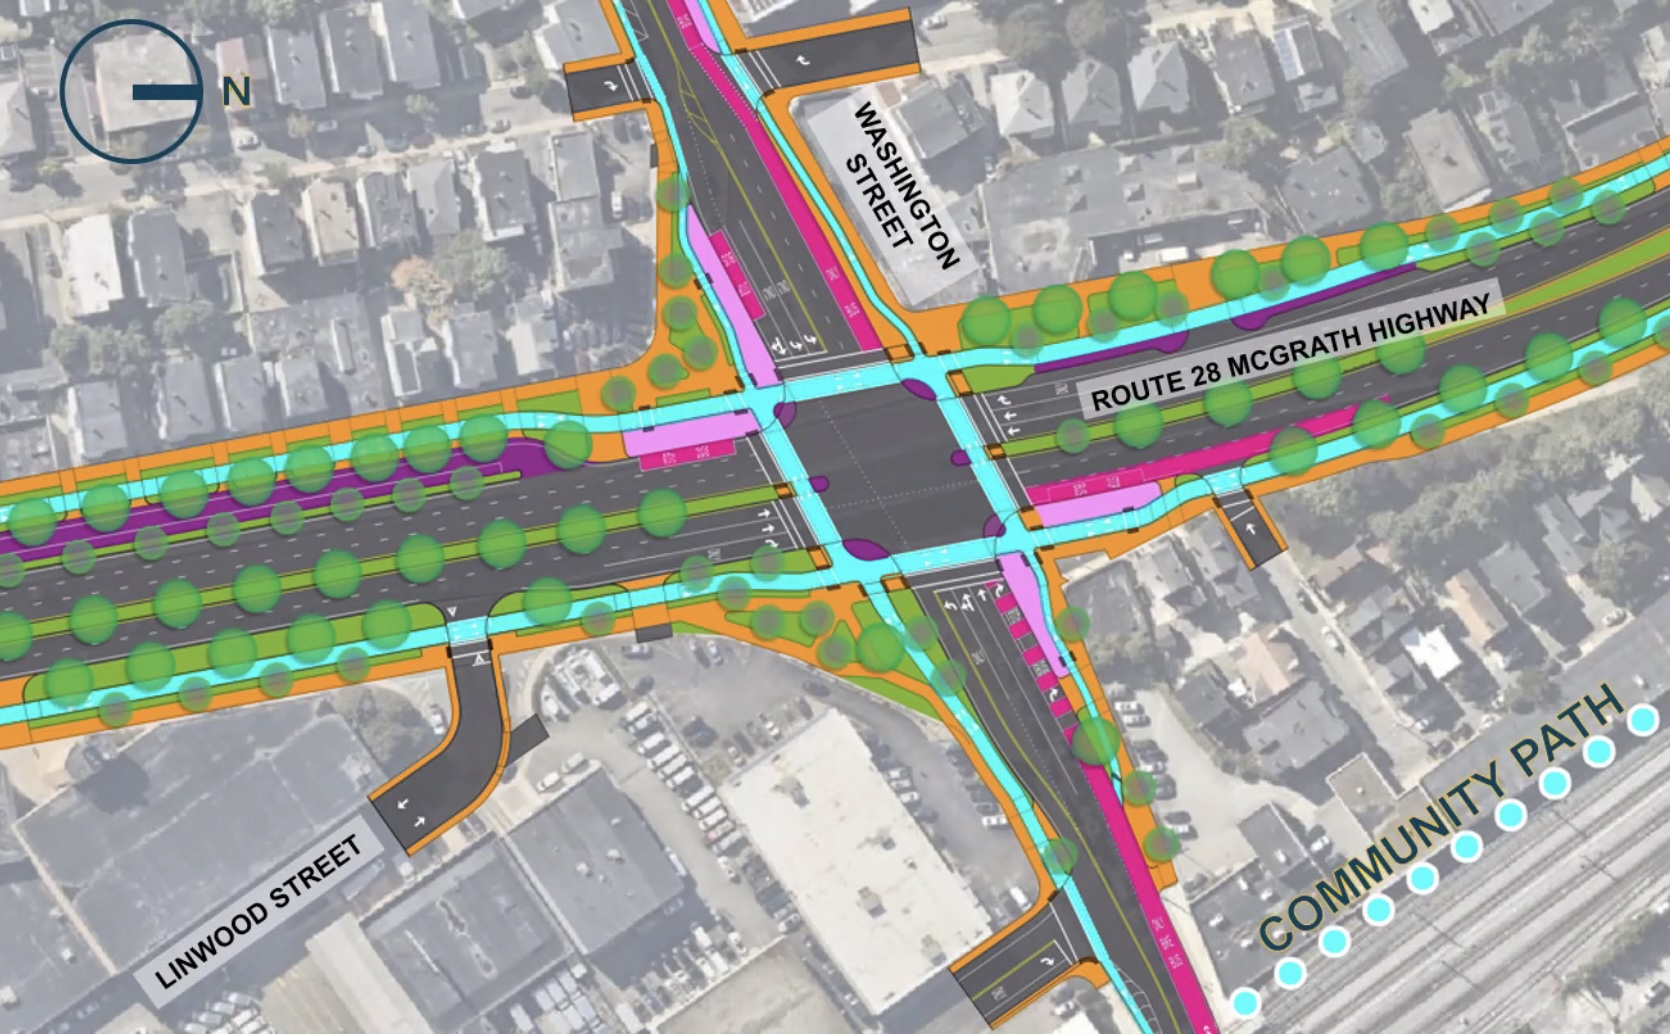 An overhead plan view of the proposed McGrath Boulevard at Washington Street. The new McGrath runs diagonally from left (south) to right (north). It features four to five lanes for motor vehicles, widening to six lanes at the Washington intersection, plus two-way bike paths on both sides (shown as a blue stripes) and wide sidewalks (in orange). A westbound dedicated bus lane is also shown on Washington Street. In the lower right a dotted blue line represents the Community Path.